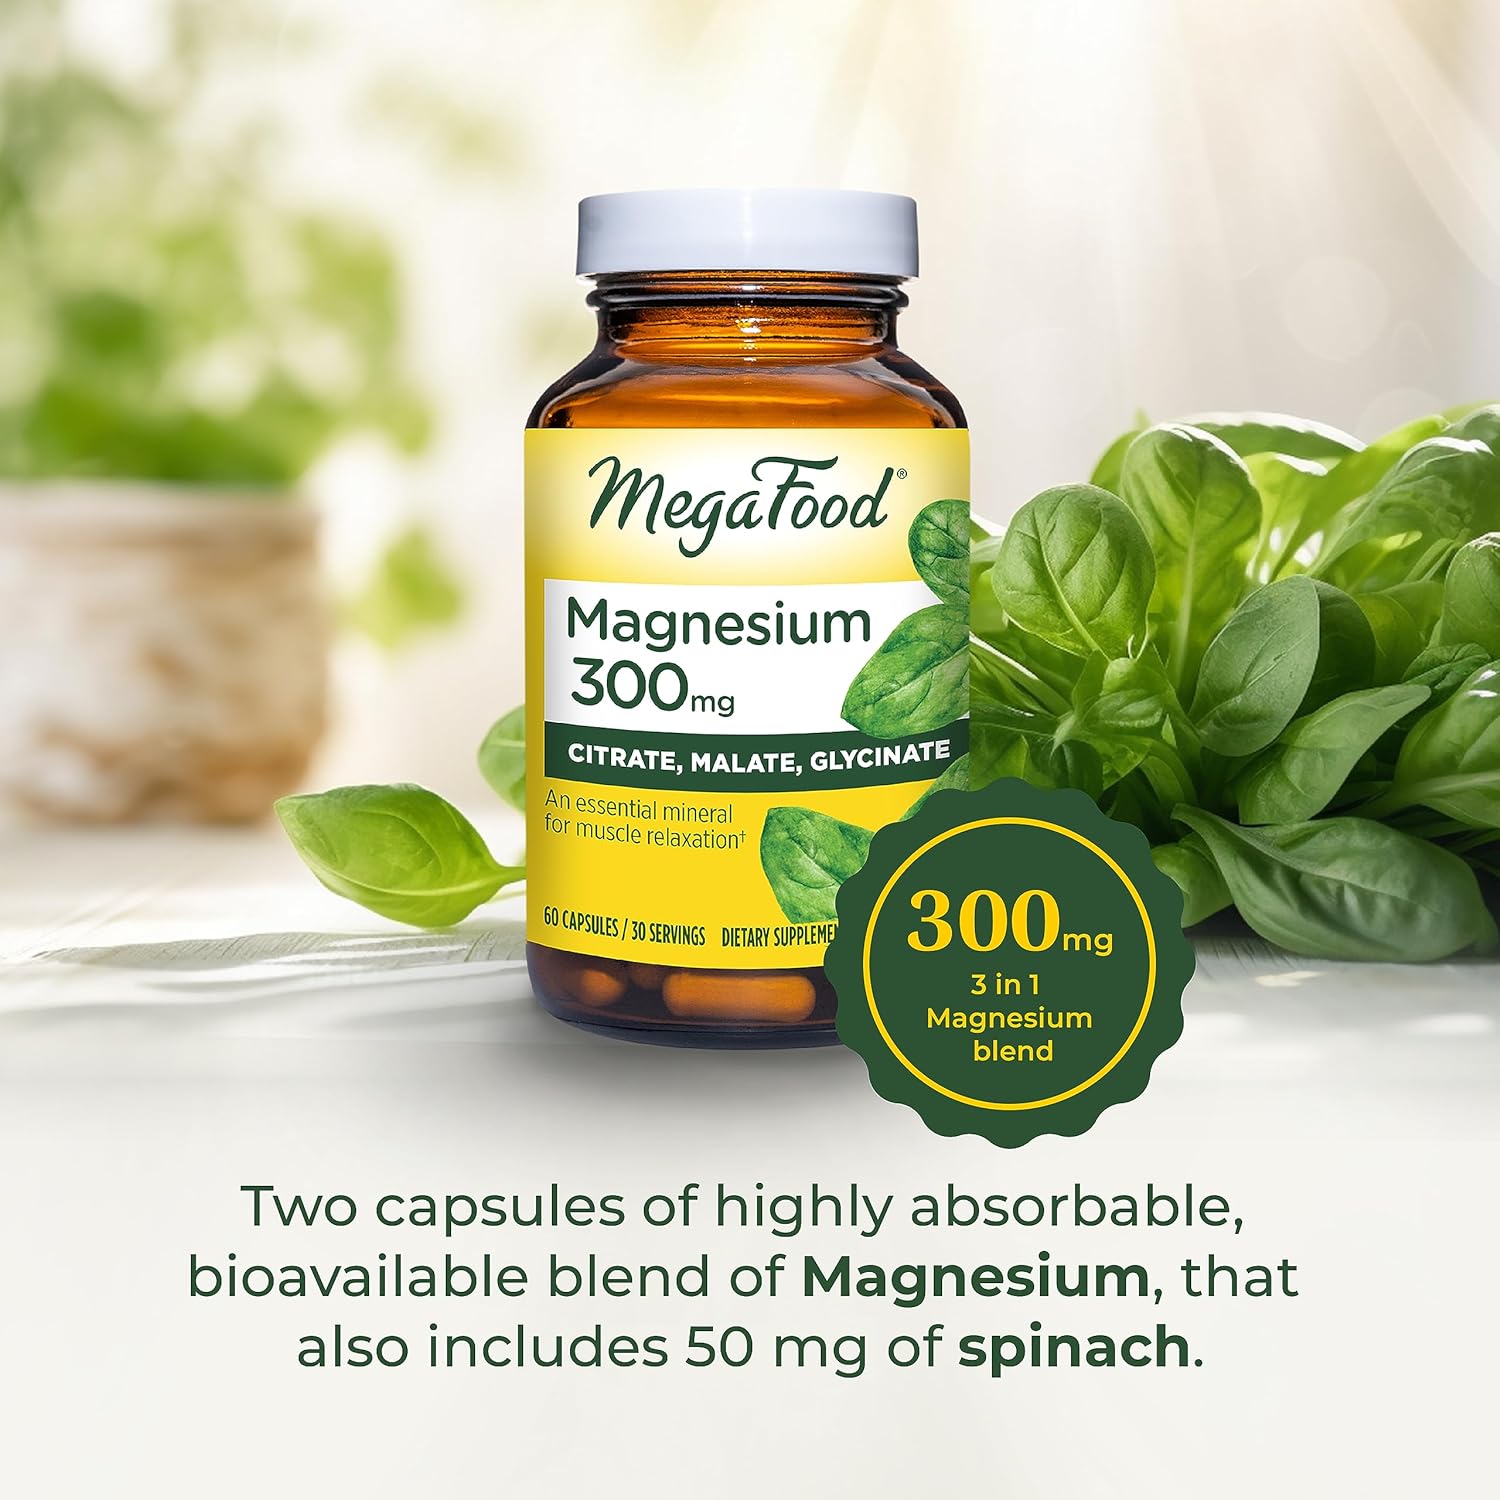 MegaFood Magnesium 300 mg - Highly absorbable blend of Magnesium Glycinate, Magnesium Citrate & Magnesium Malate to Help Support Heart, Nerve Health and Relaxation - 60 Capsules (30 Servings) : Health & Household